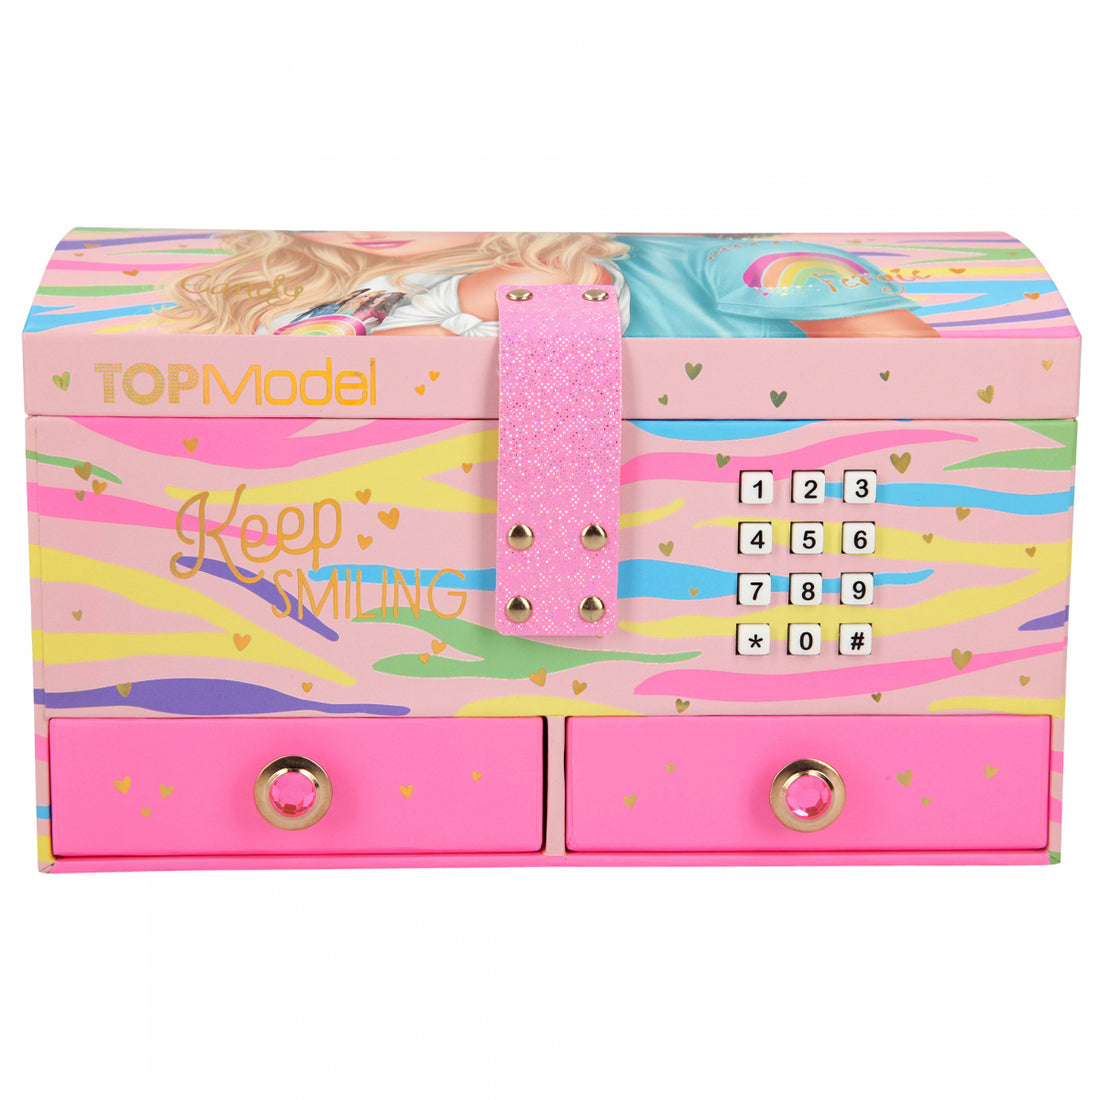 depesche-topmodel-big-jewellery-box-with-code-and-sound-motif-2- (1)